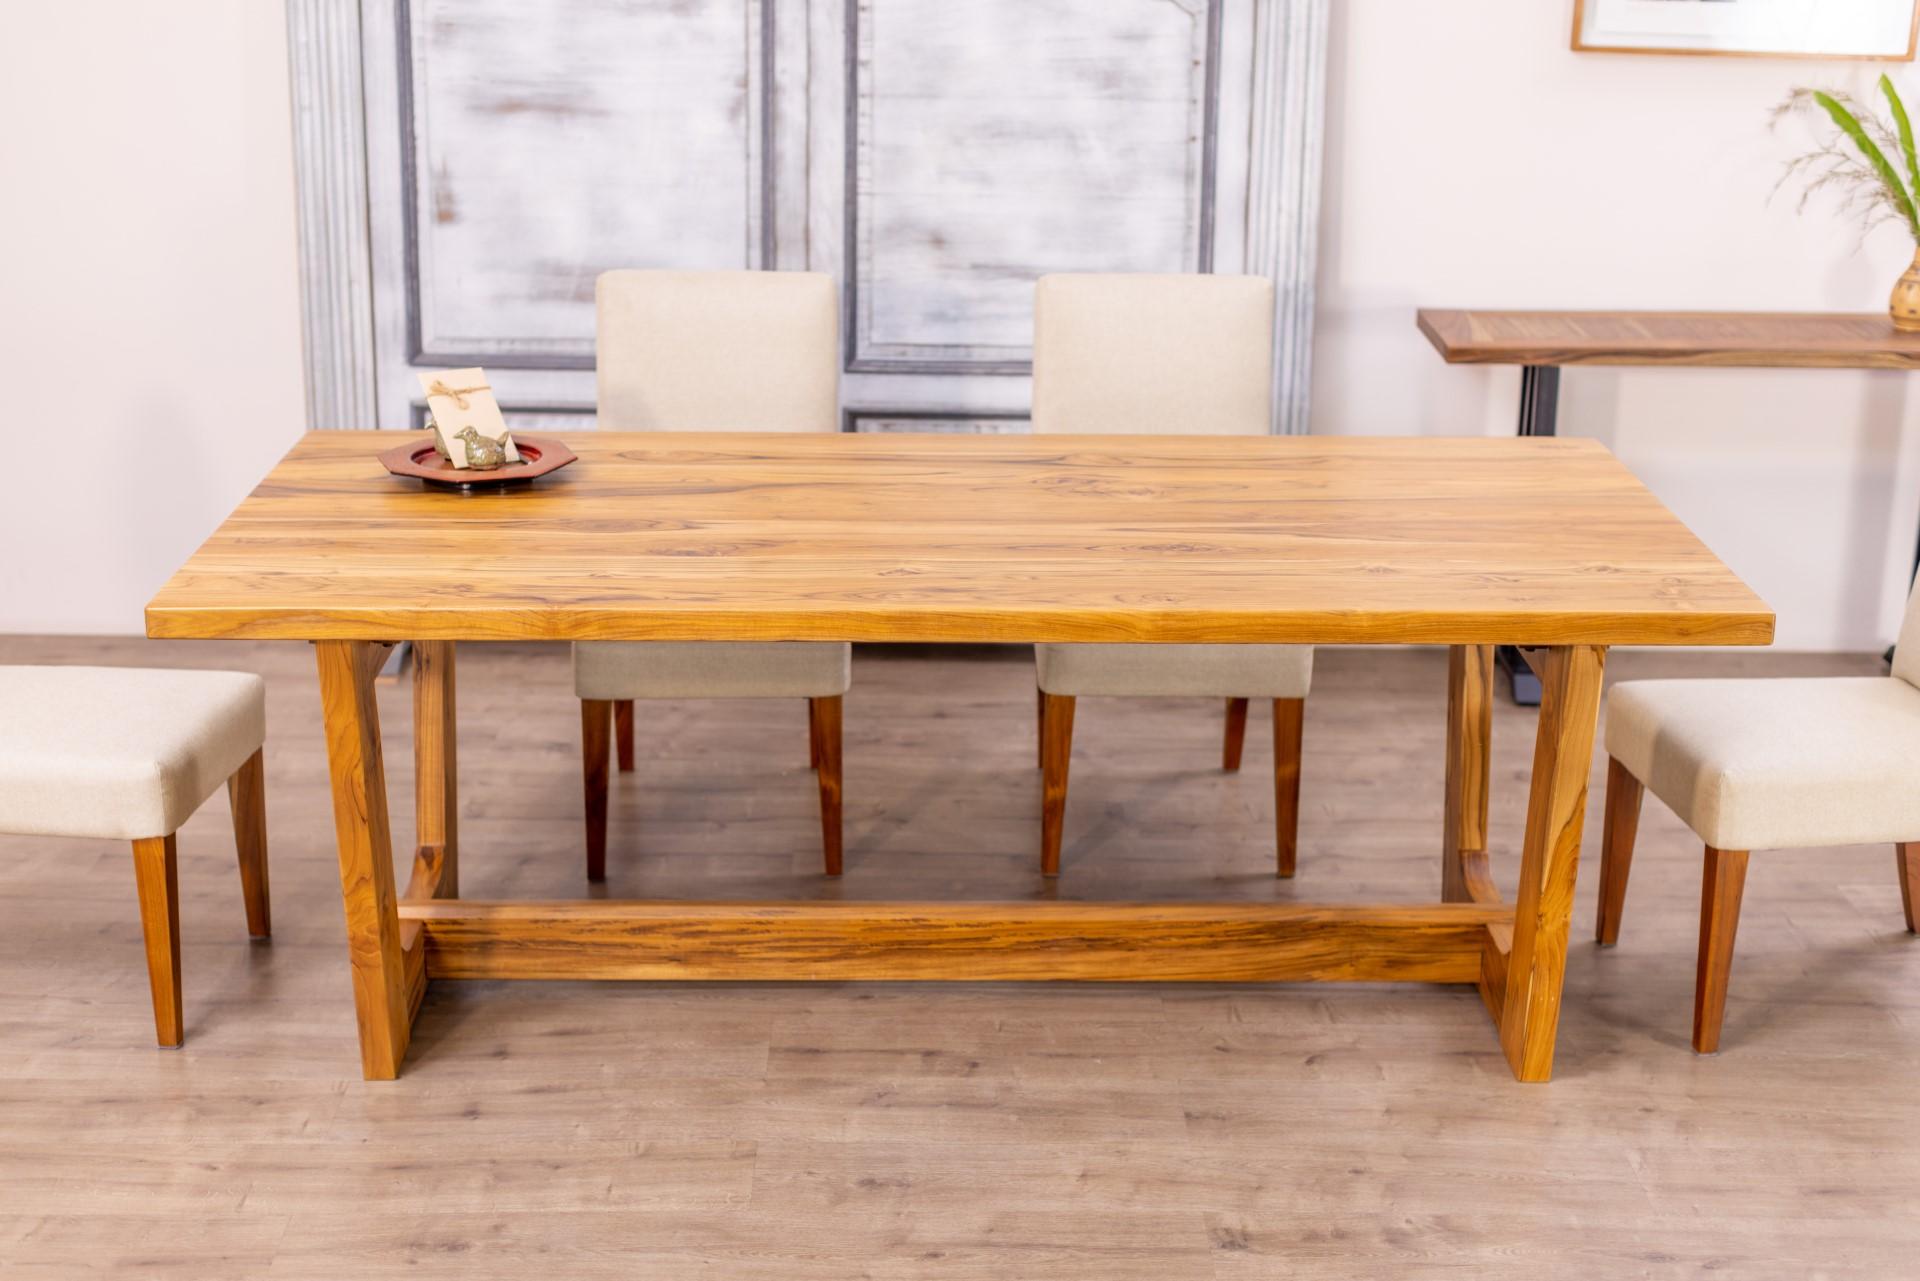 Have it in time for Christmas!

This 100% solid hardwood dining table exudes sophisticated, traditional style with a contemporary twist. The beautiful, solid oak or teak top spans to reveal gorgeous hand-finished wood grain and texture. Stabilized